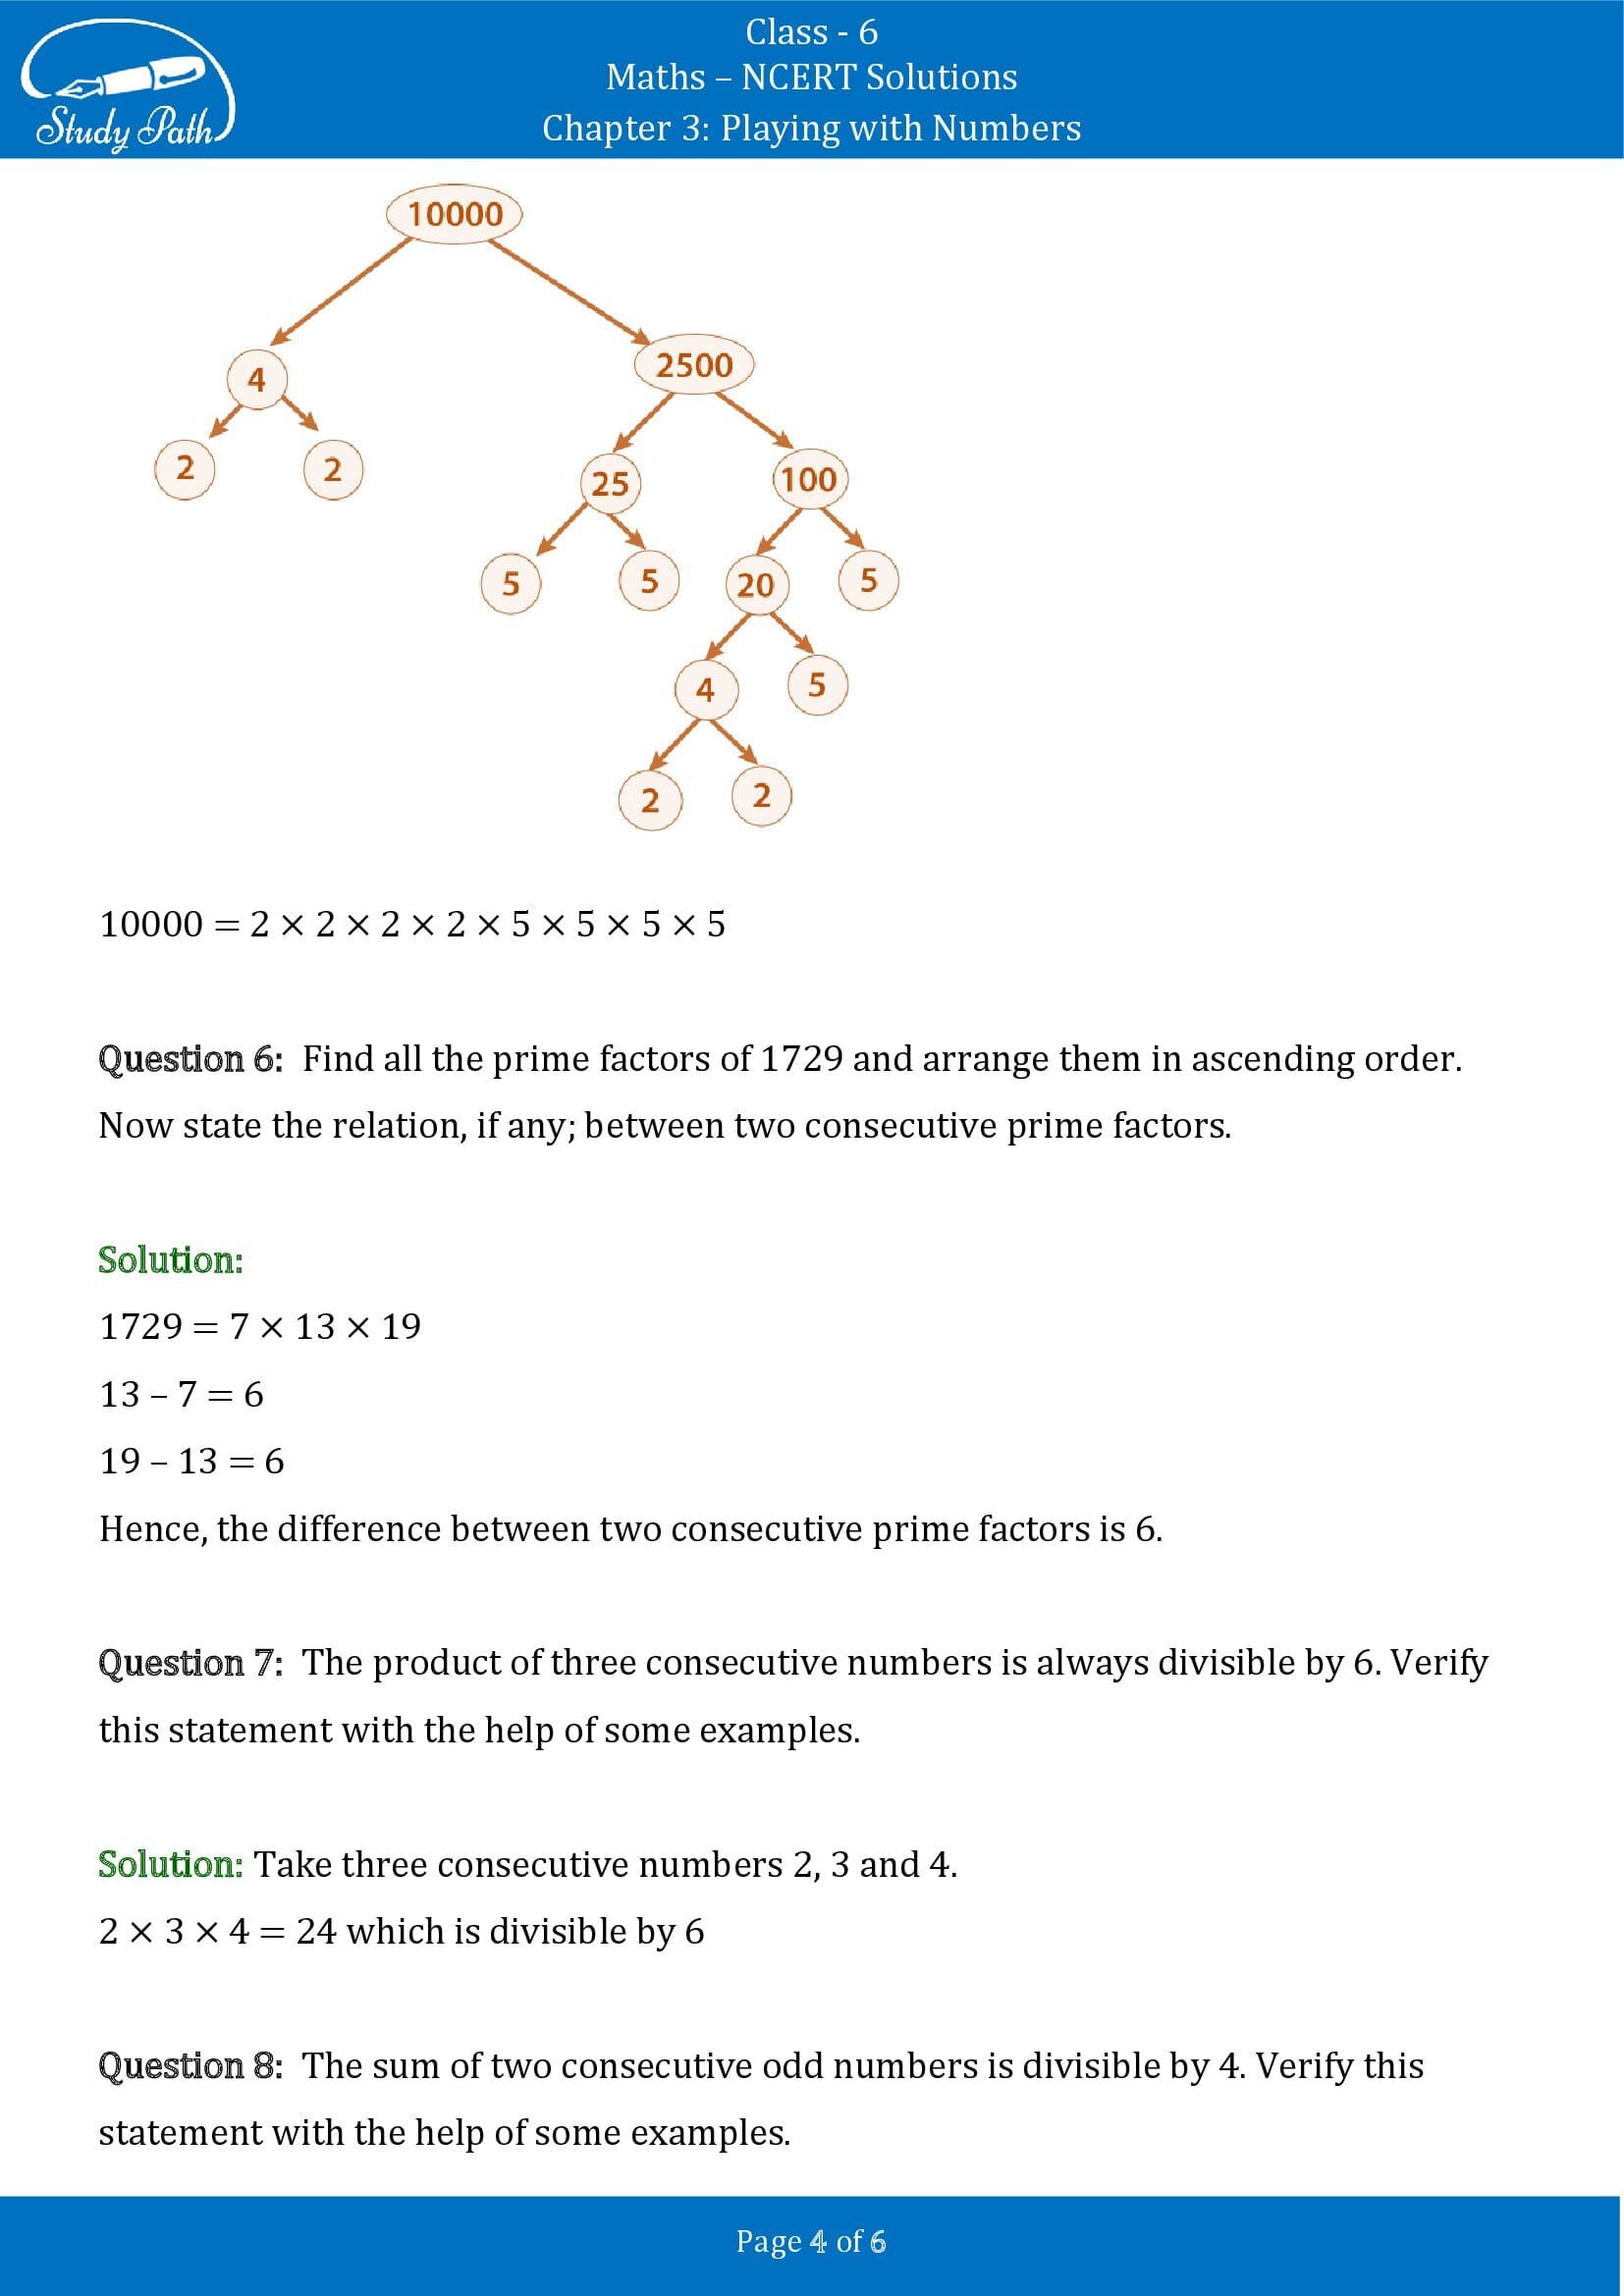 NCERT Solutions for Class 6 Maths Chapter 3 Playing with Numbers Exercise 3.5 00004